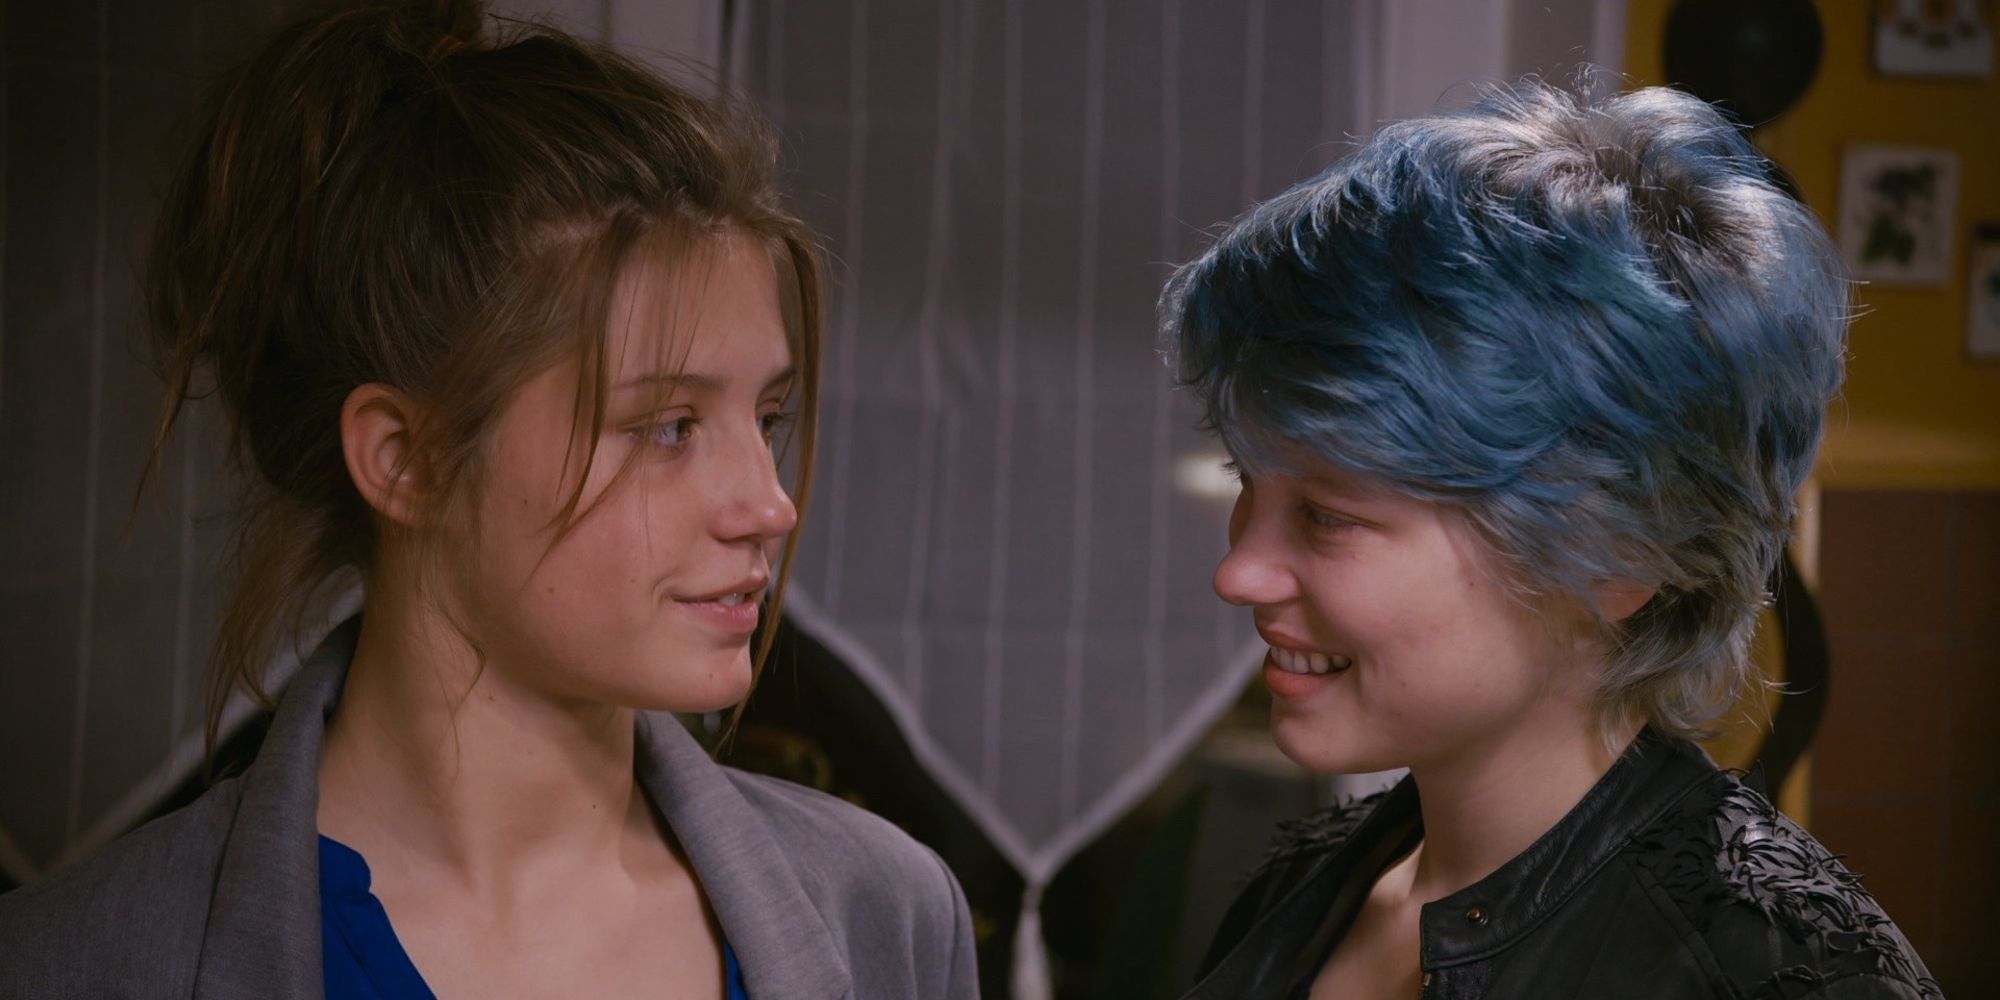 Lea Seydoux and Adele Exarchopolous smile together in Blue is the Warmest Color